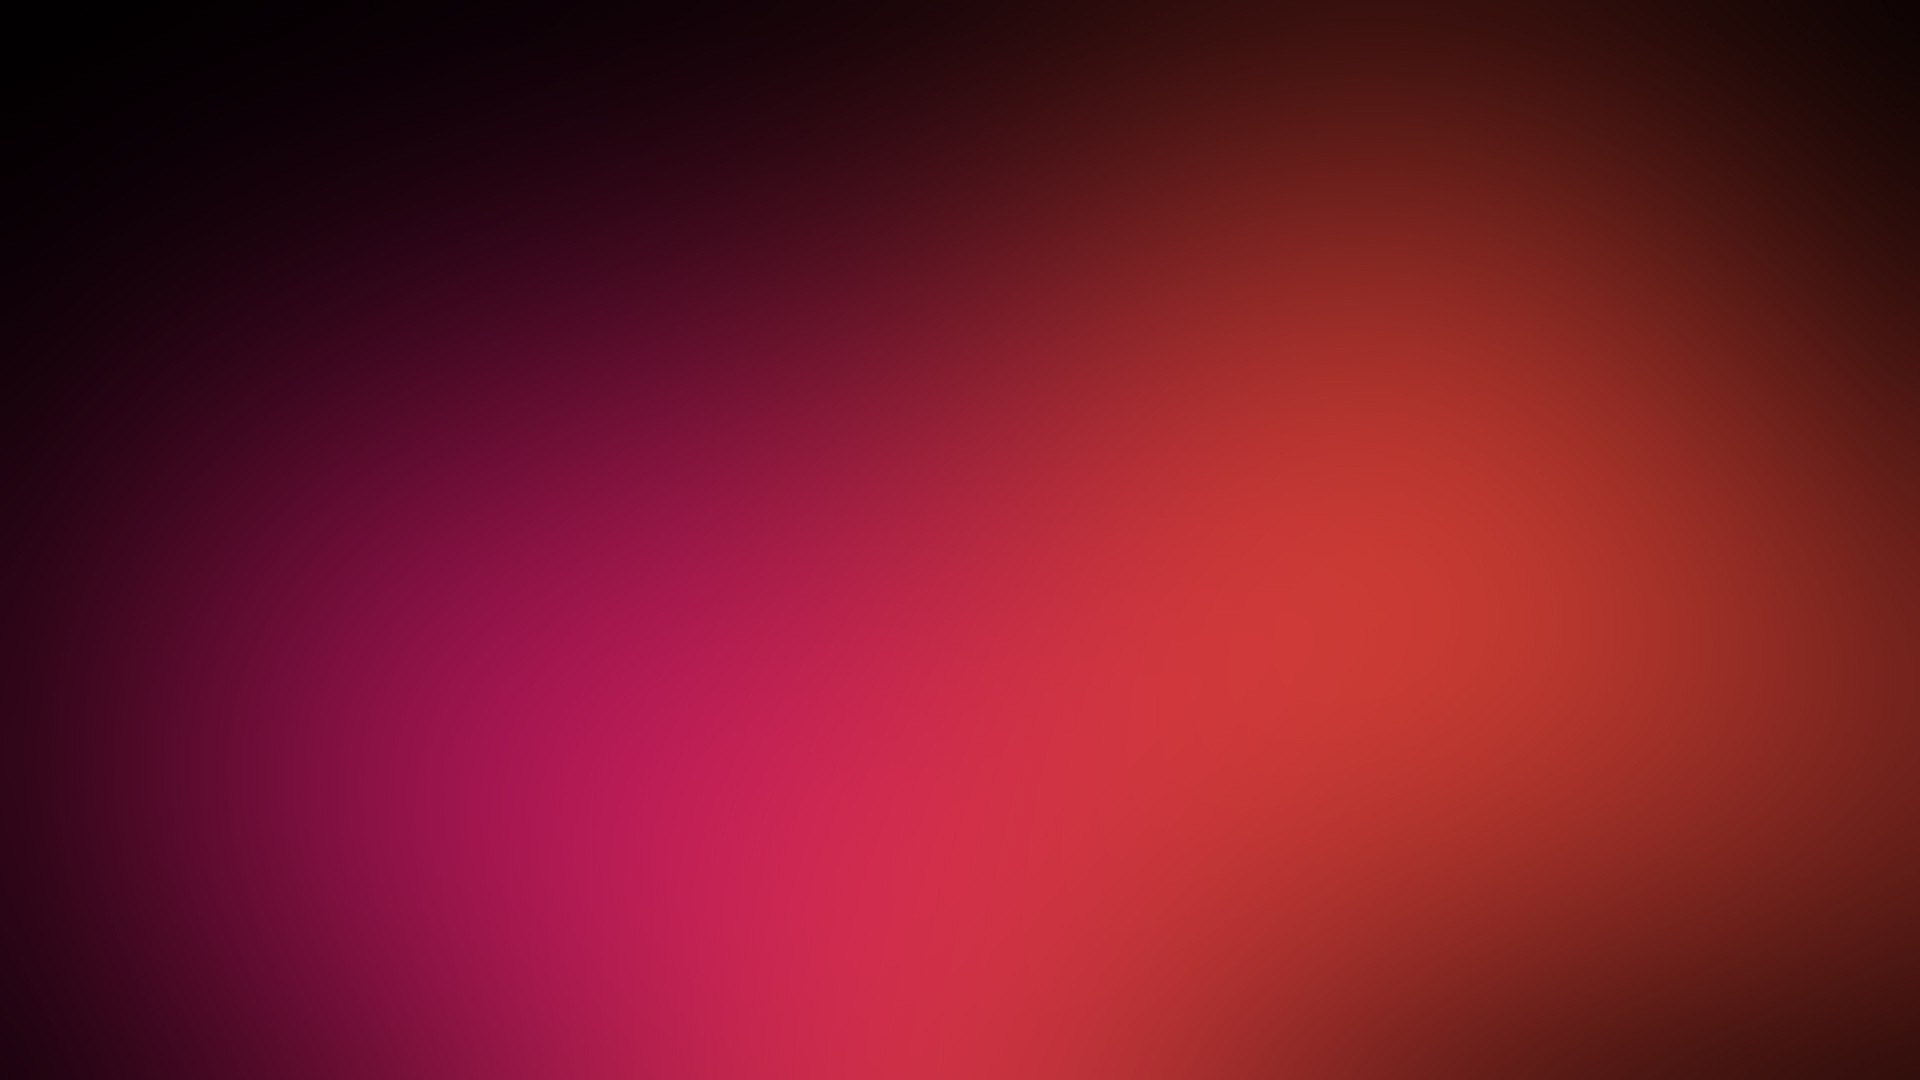 1920x1080 Red Pink Wallpaper  Red, Pink, Patterns, Textures, Gaussian .